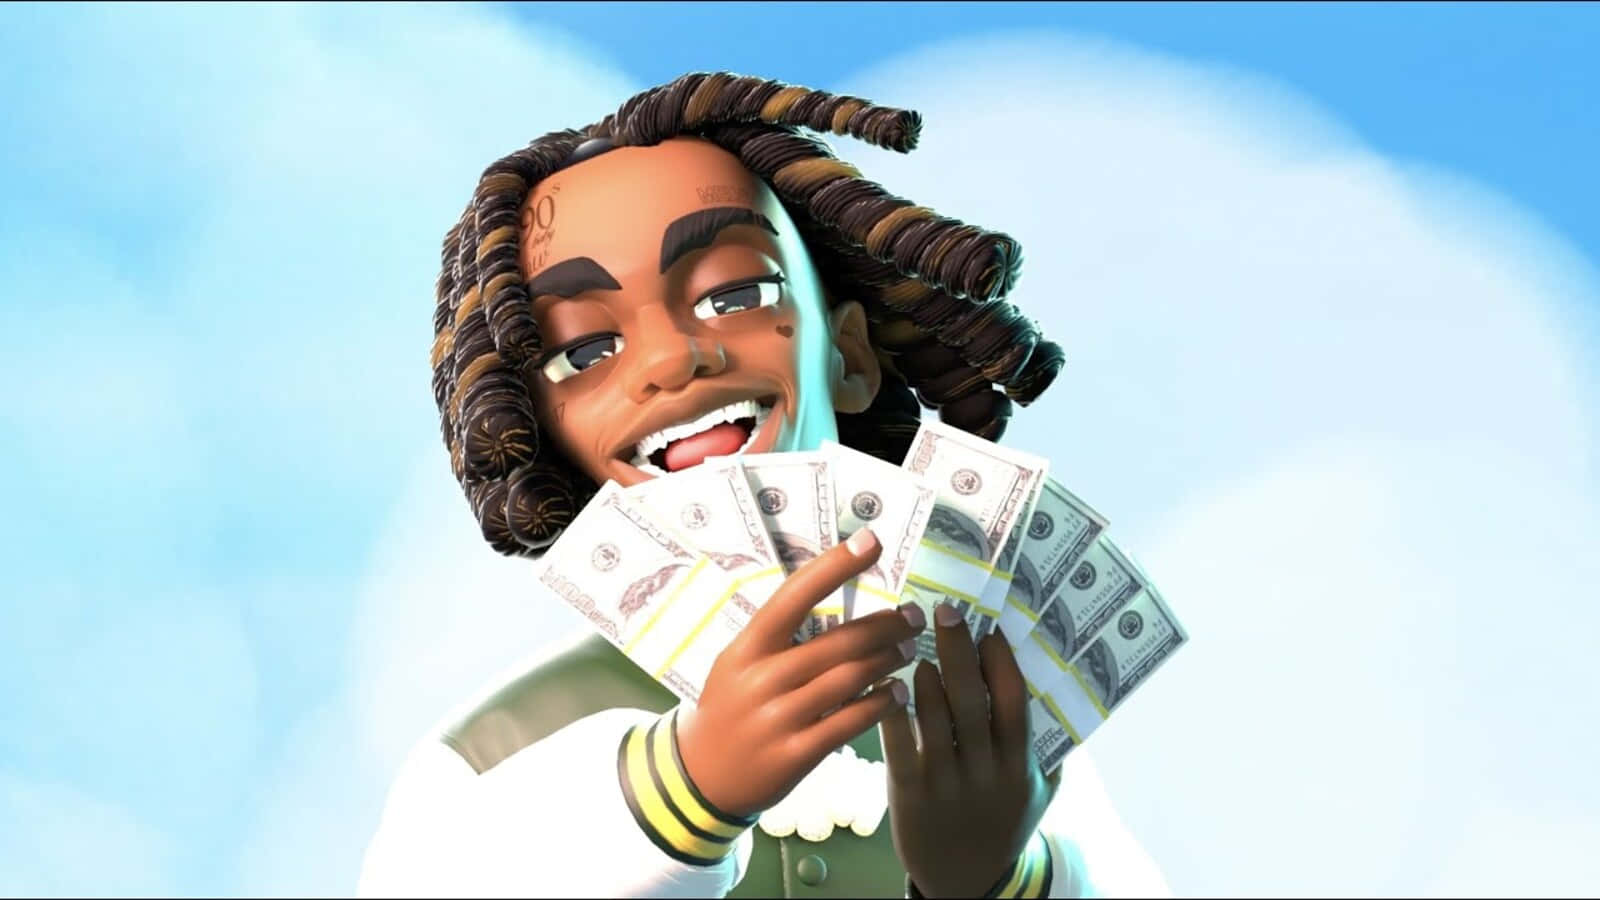 YNW Melly Cartoon Art on the Stage Wallpaper